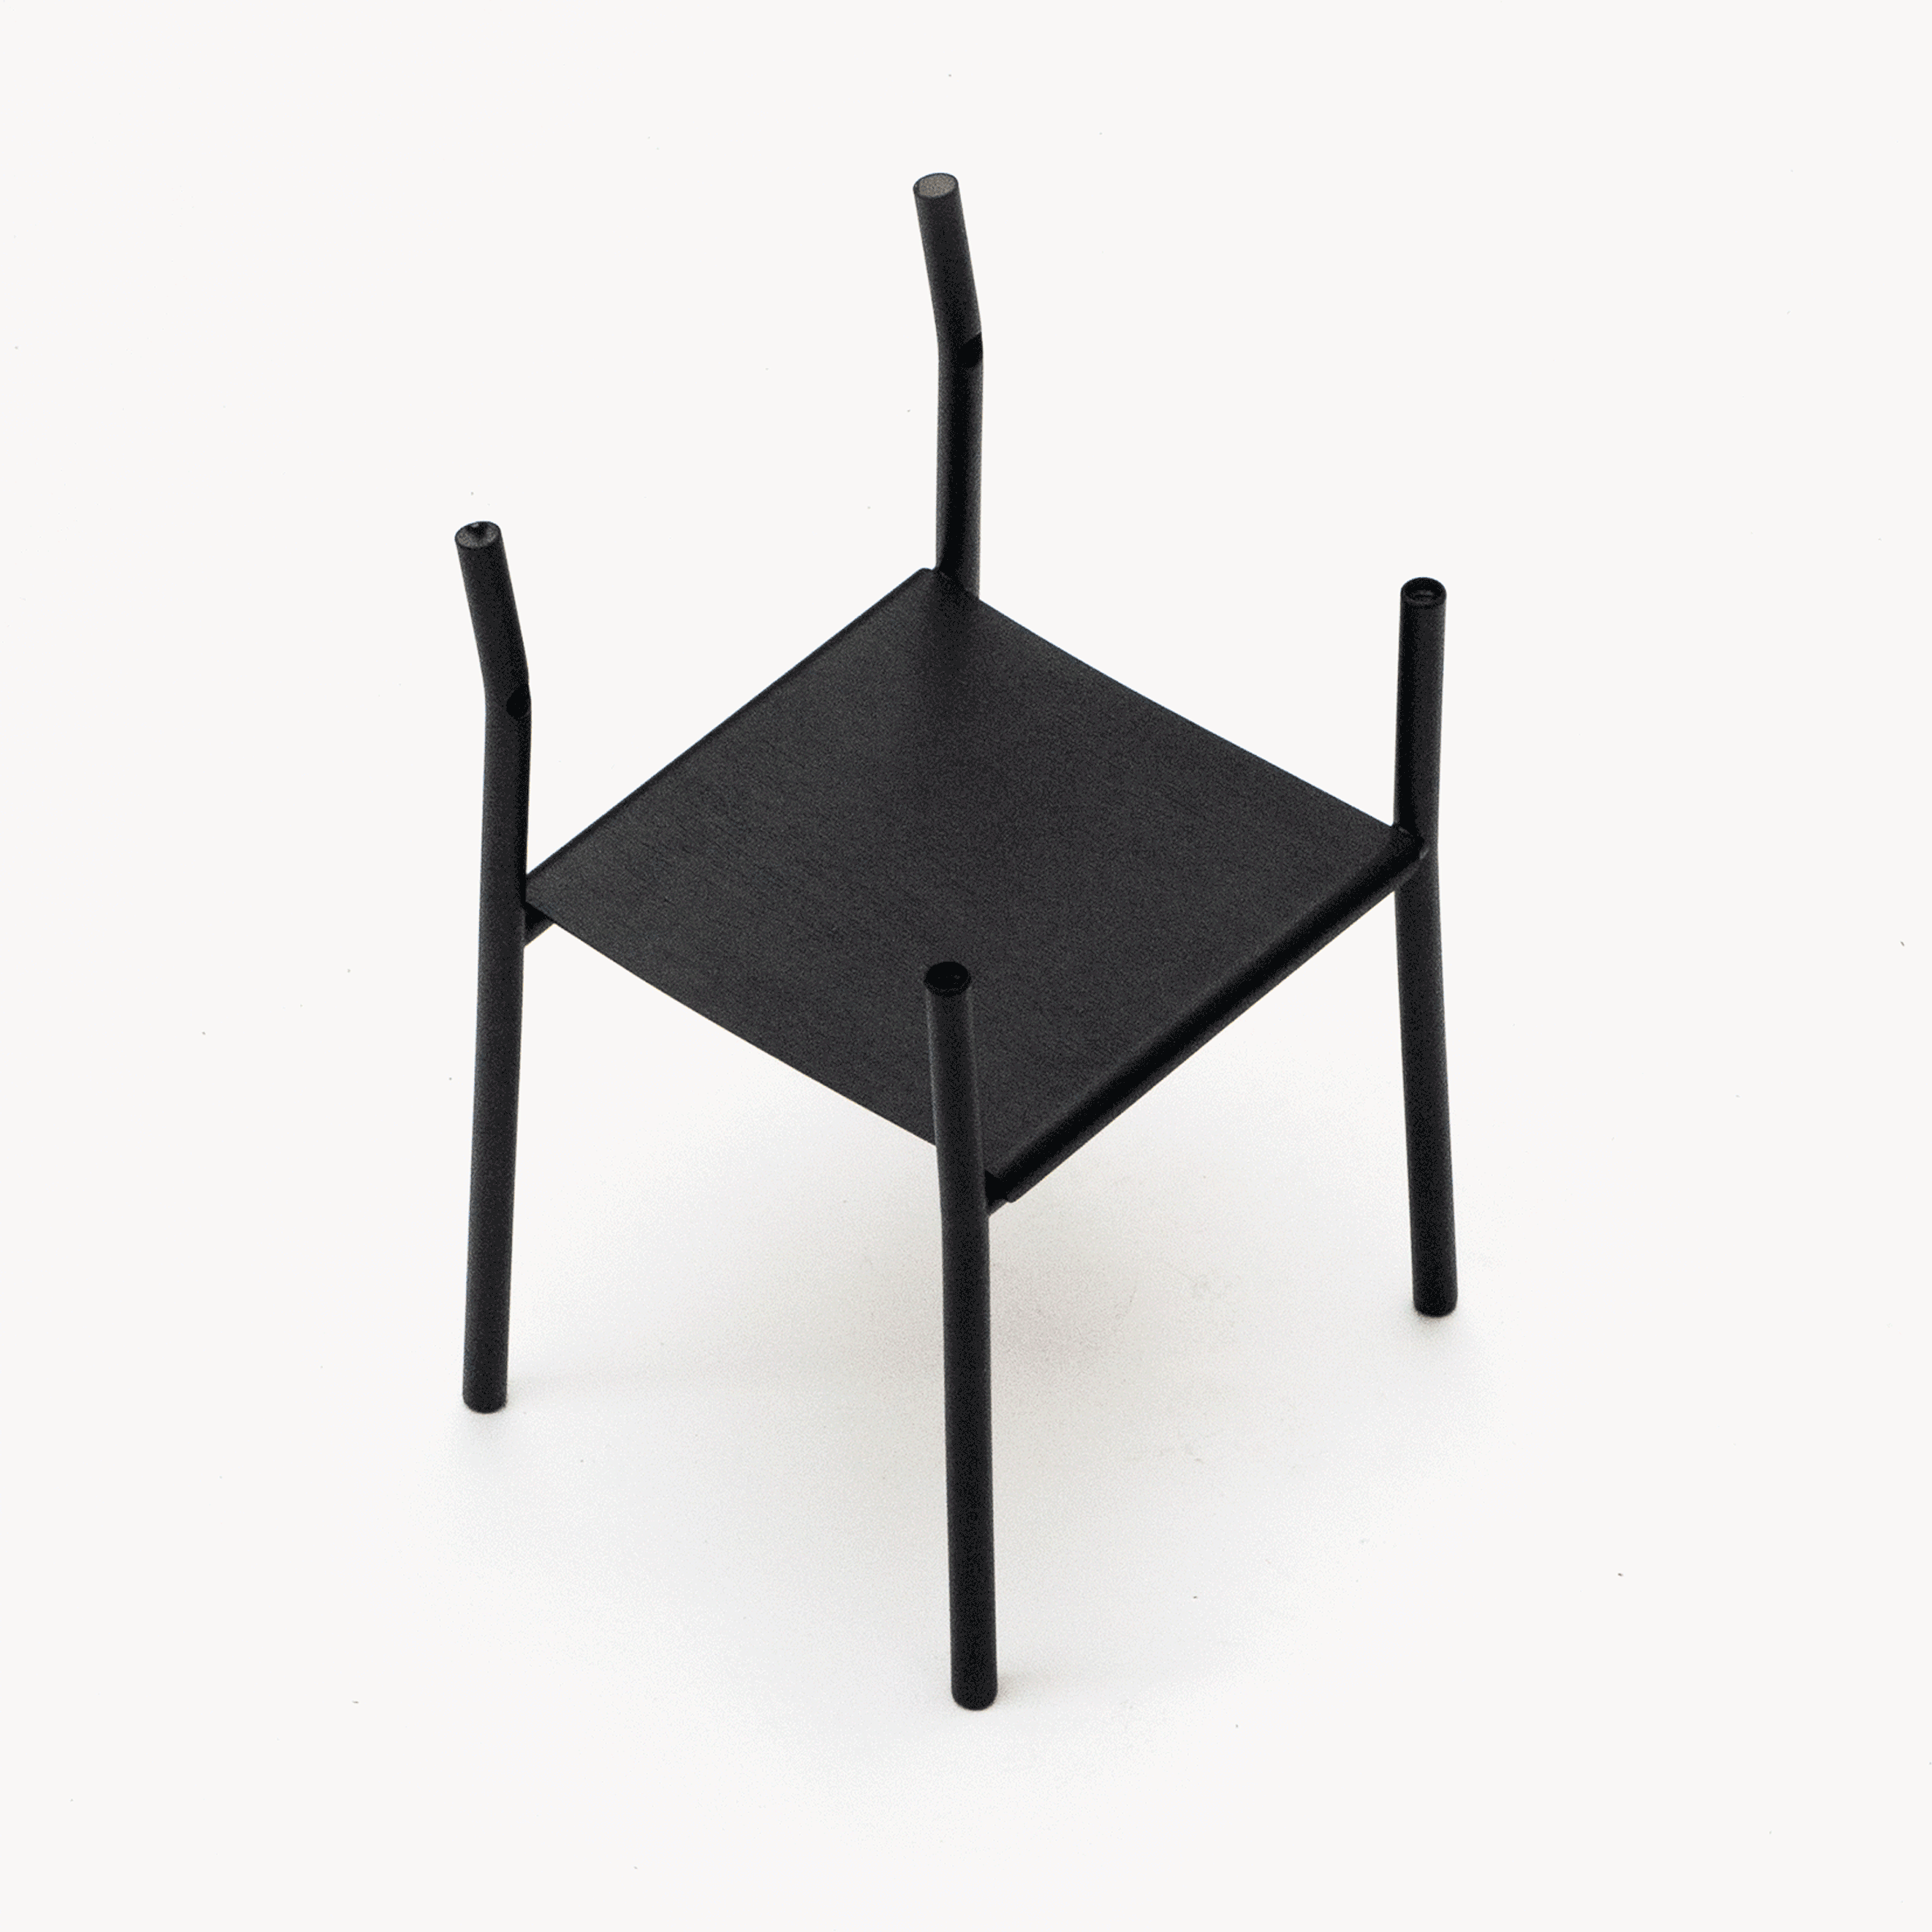 Bouroullec brothers create Rope Chair with one continuous piece of cord